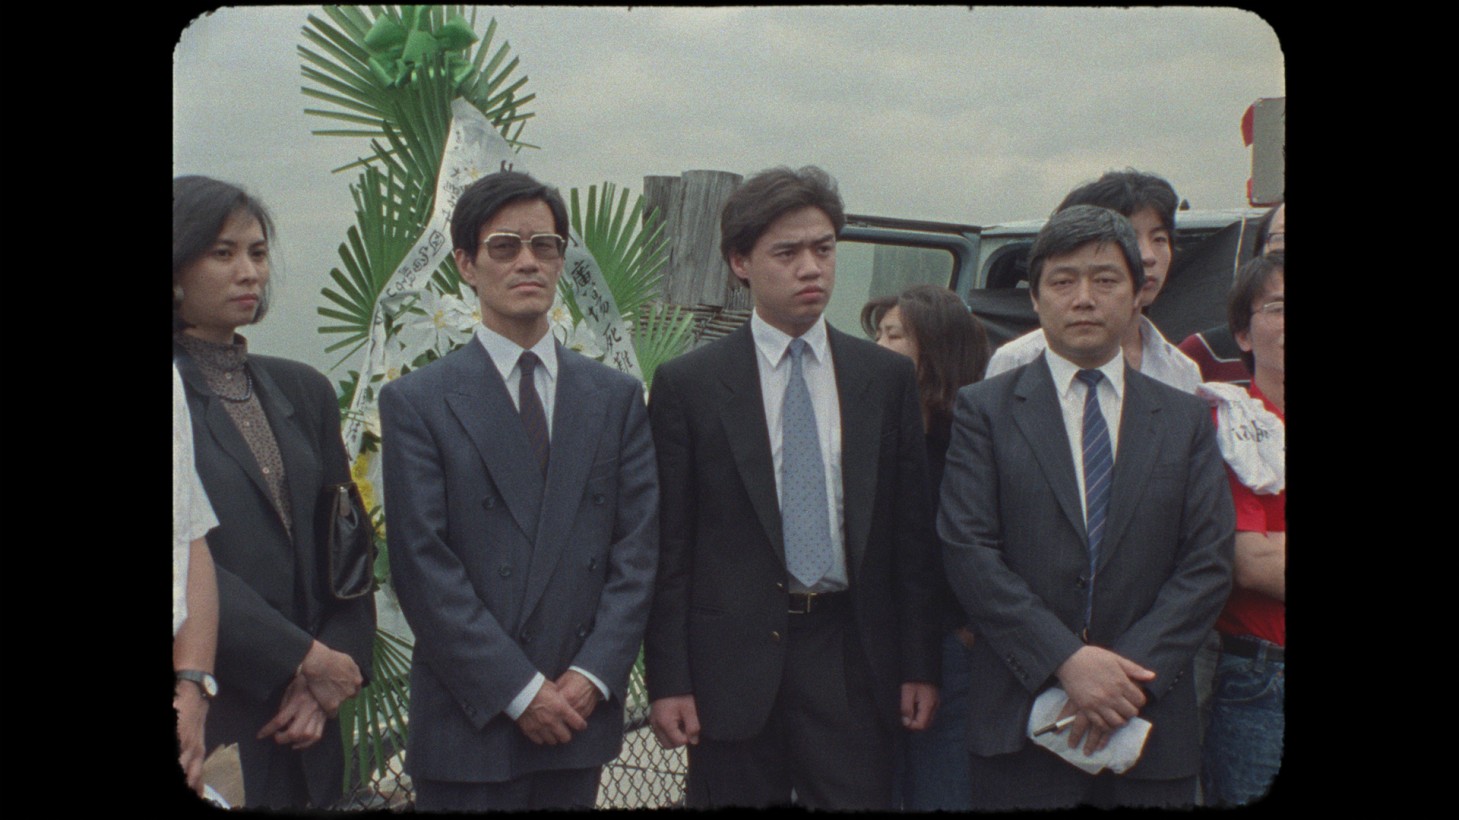 A group of unsmiling Asian men and women in suits, image from film cell with rounded corners